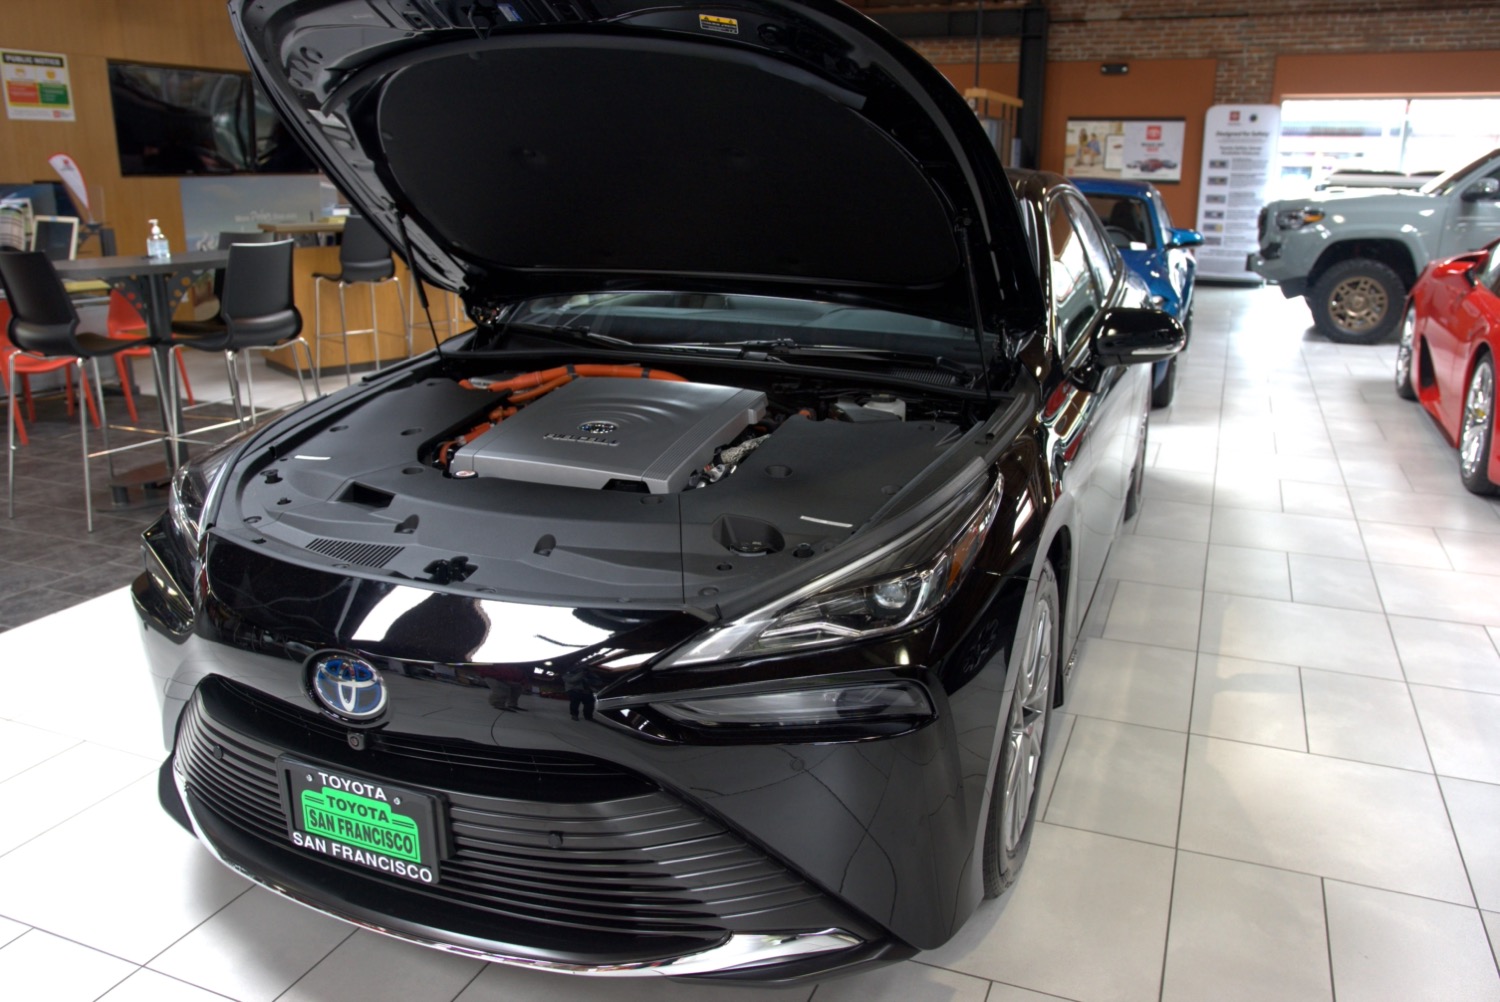 a normal looking black toyota sedan in a car showroom. the hood is up, revealing a very simple layout, with a large rectangular metal housing for the hydrogen engine